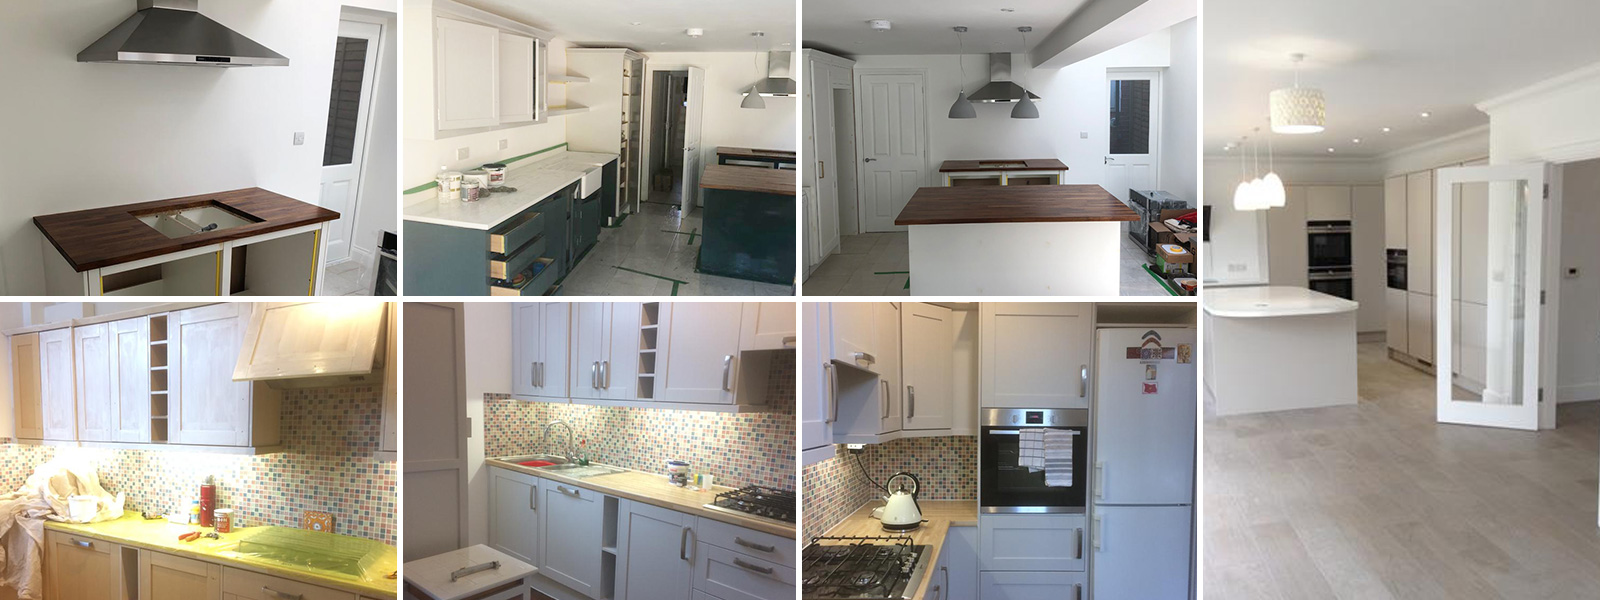 Kitchen Installations & Decorating In North London - Colour Chart Decorating